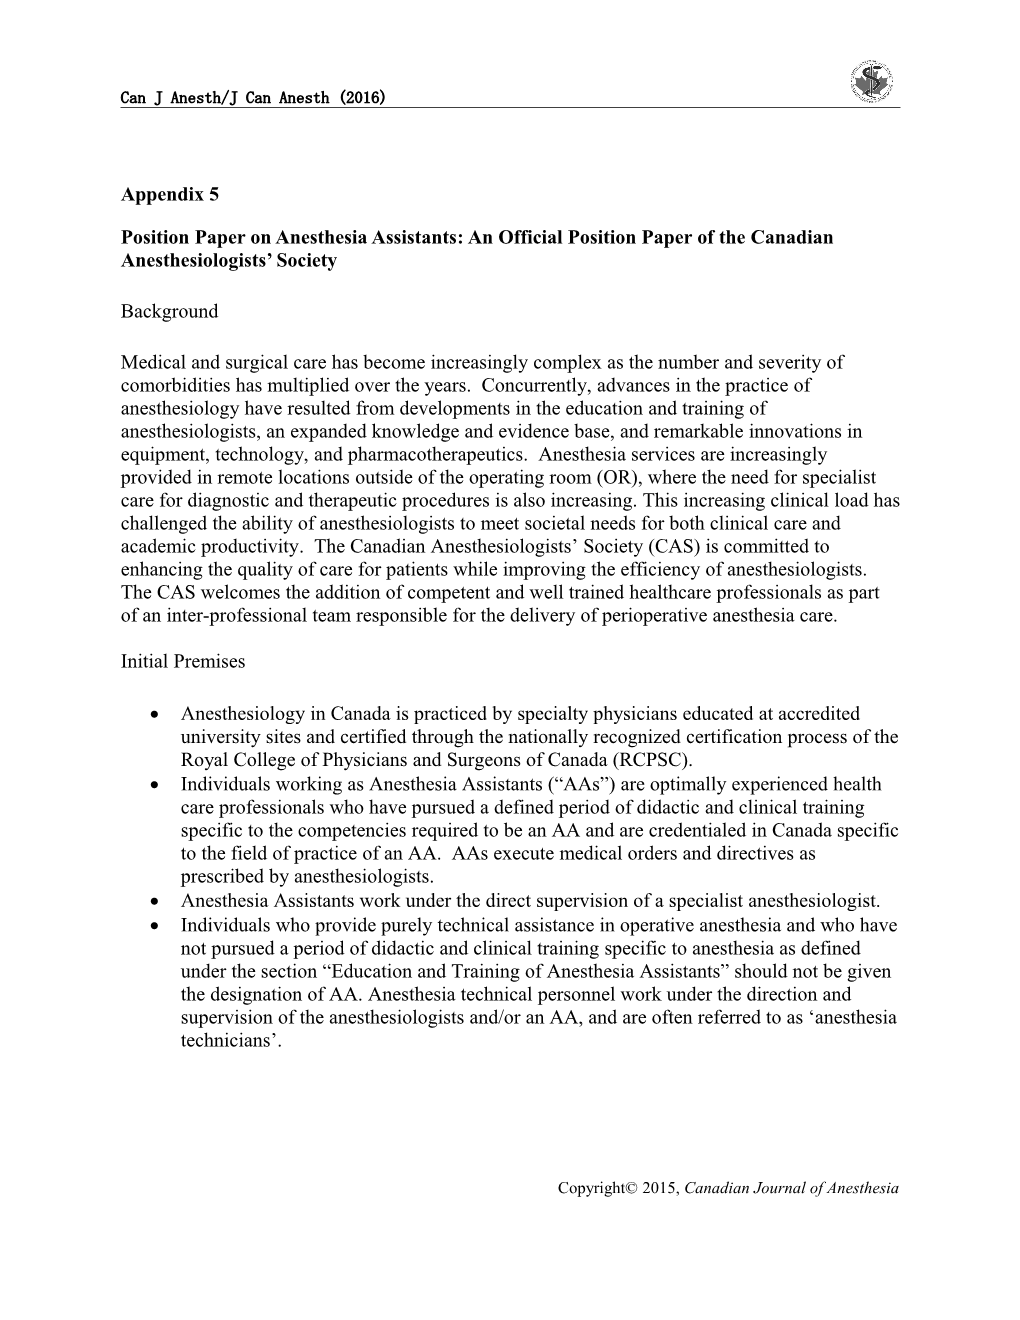 Position Paper on Anesthesia Assistants